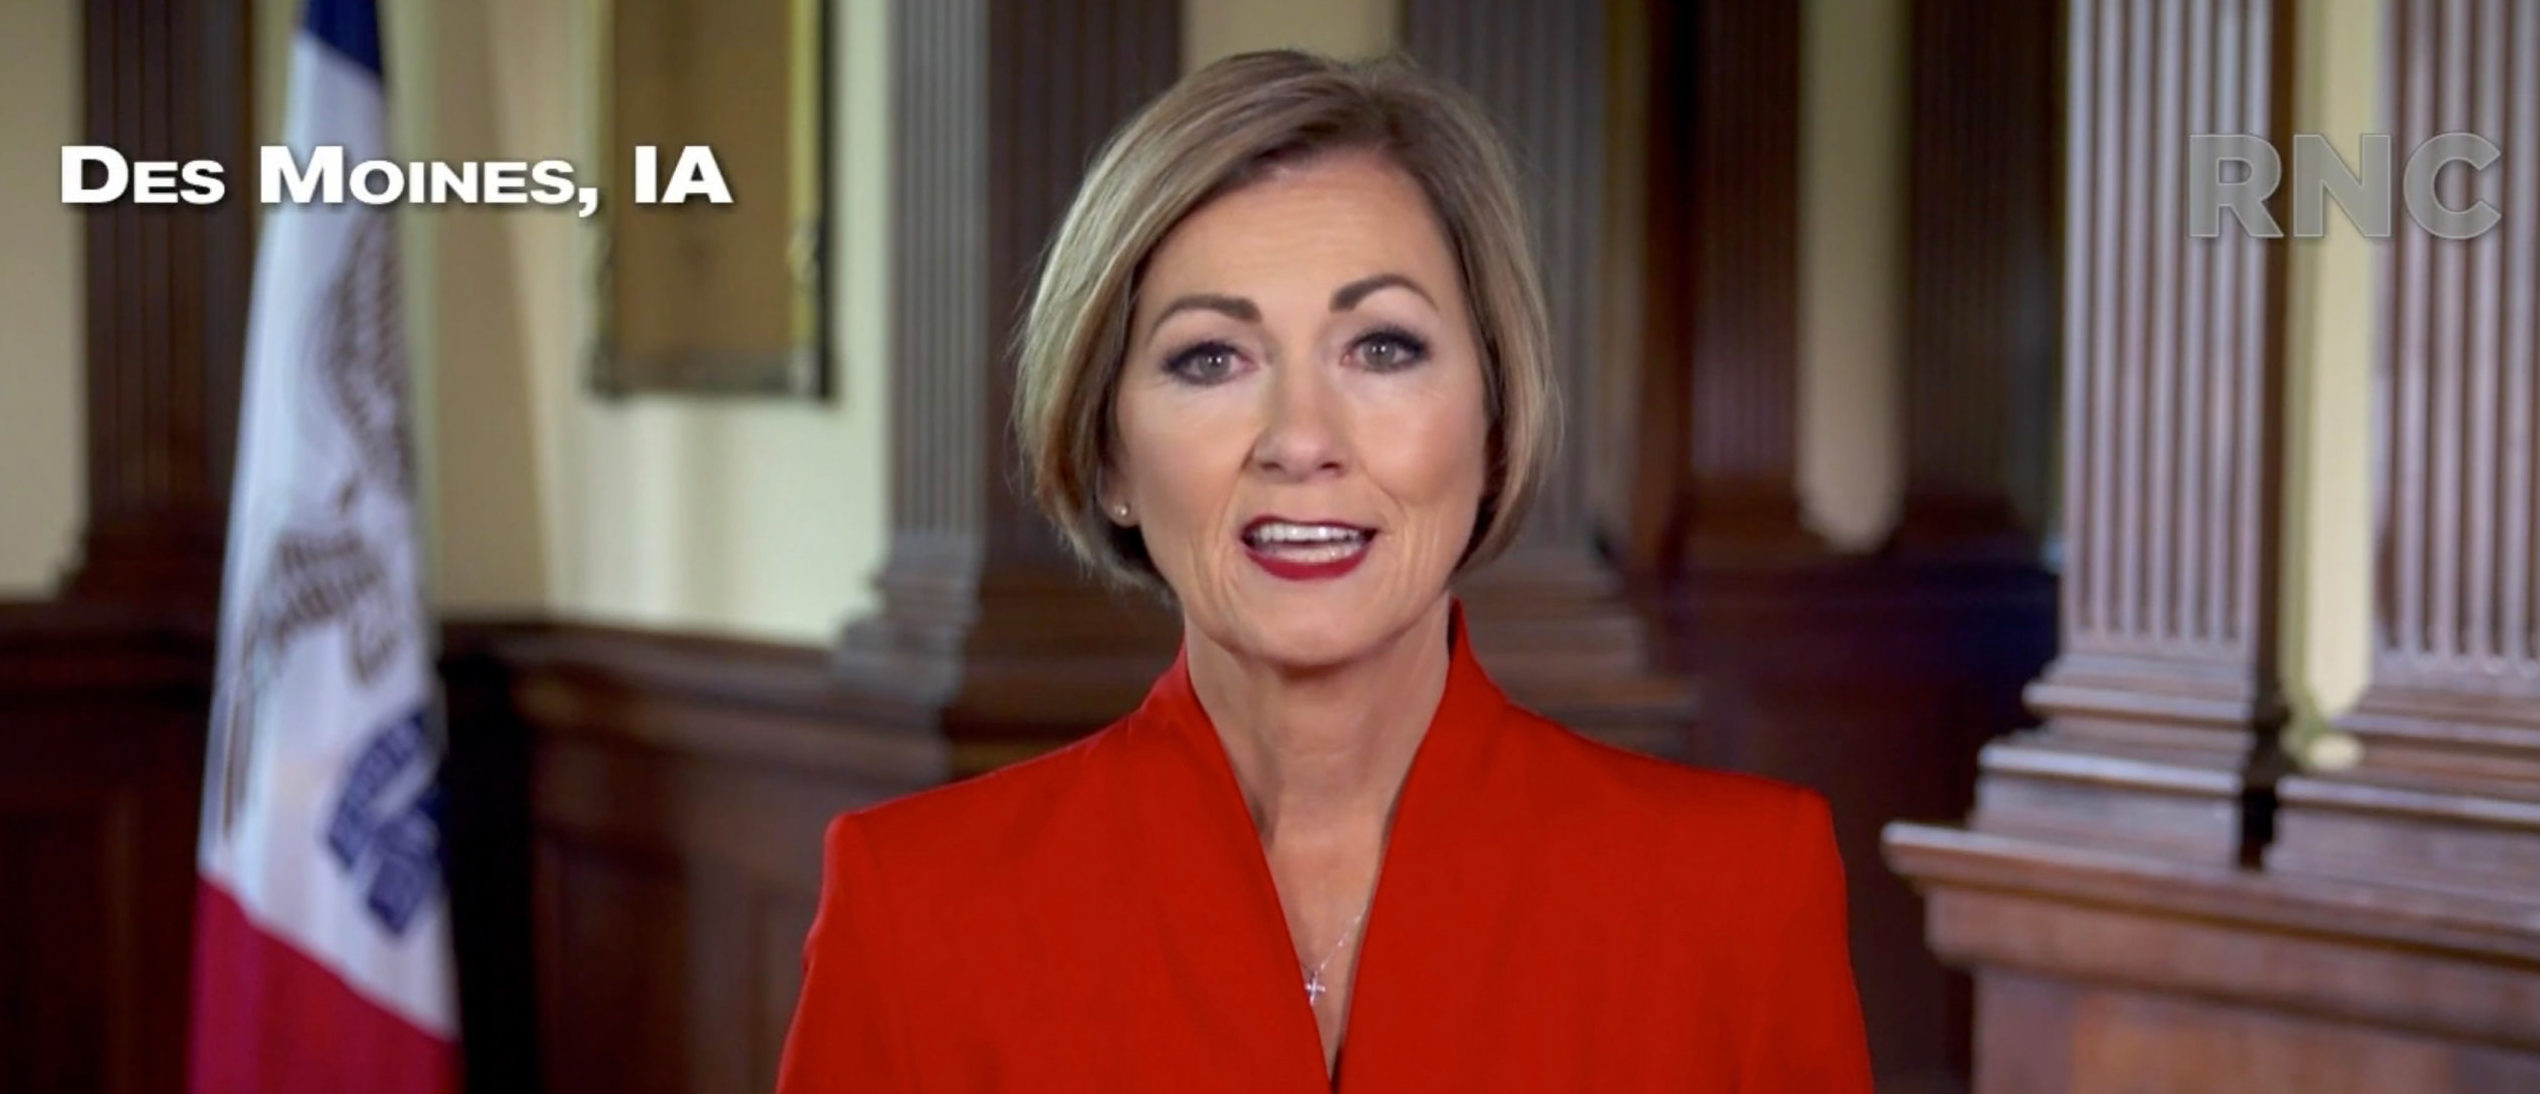 CHARLOTTE, NC - AUGUST 25: (EDITORIAL USE ONLY) In this screenshot from the RNC’s livestream of the 2020 Republican National Convention, Iowa Gov. Kim Reynolds addresses the virtual convention on August 25, 2020. The convention is being held virtually due to the coronavirus pandemic but will include speeches from various locations including Charlotte, North Carolina and Washington, DC. (Photo Courtesy of the Committee on Arrangements for the 2020 Republican National Committee via Getty Images)